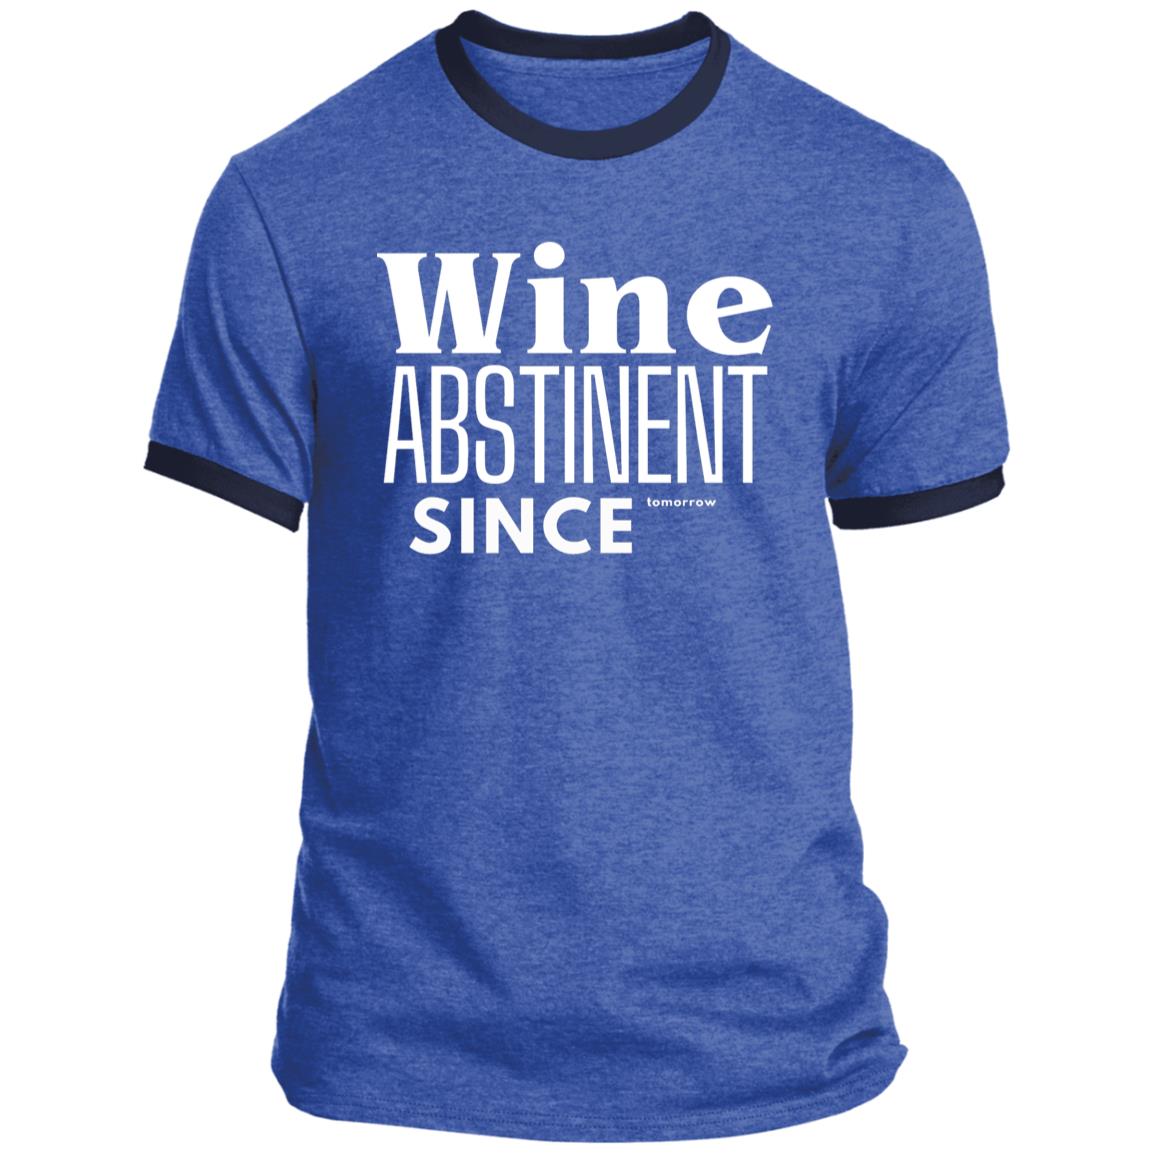 WINE ABSTINENT TOMORROW Ringer Tee